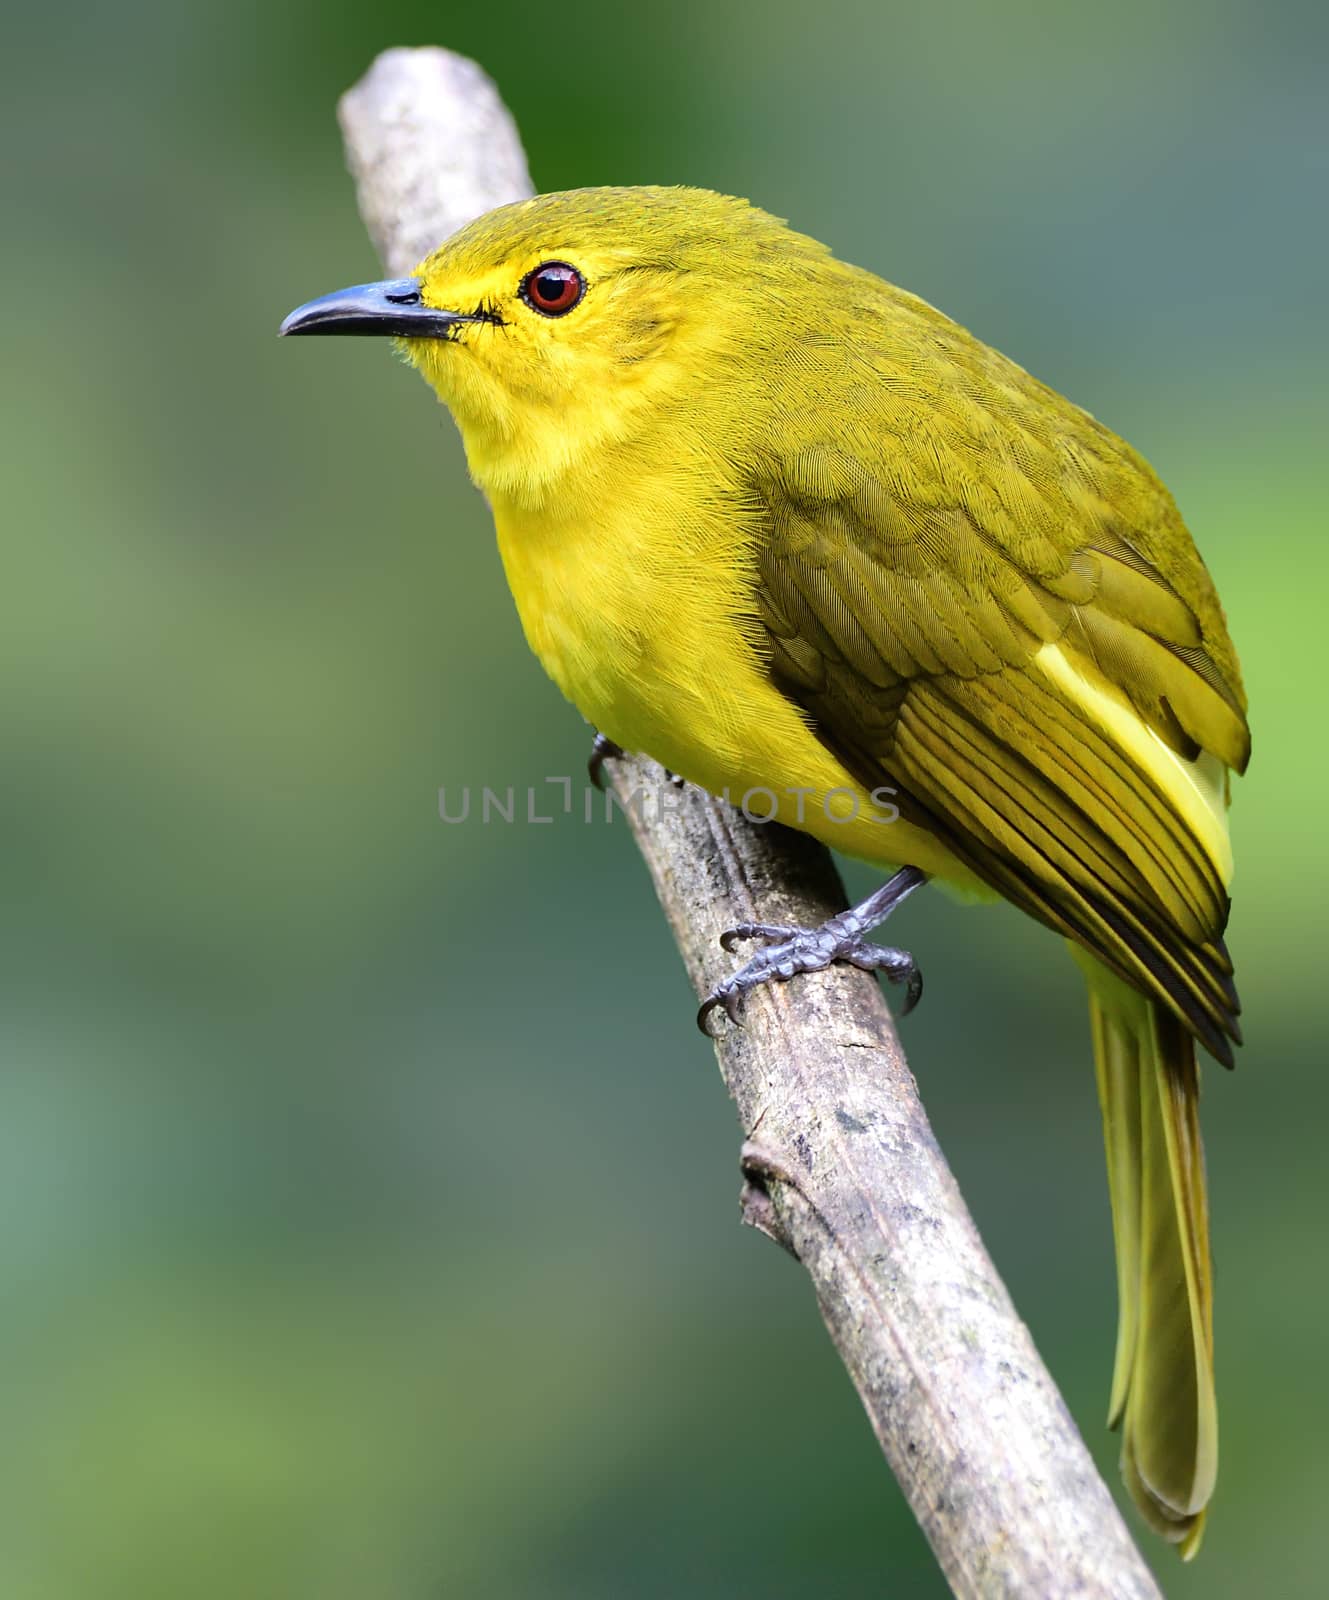 The yellow-browed bulbul, or golden-browed bulbul, is a species of songbird in the bulbul family, Pycnonotidae. It is found in the forests of southern India and Sri Lanka.